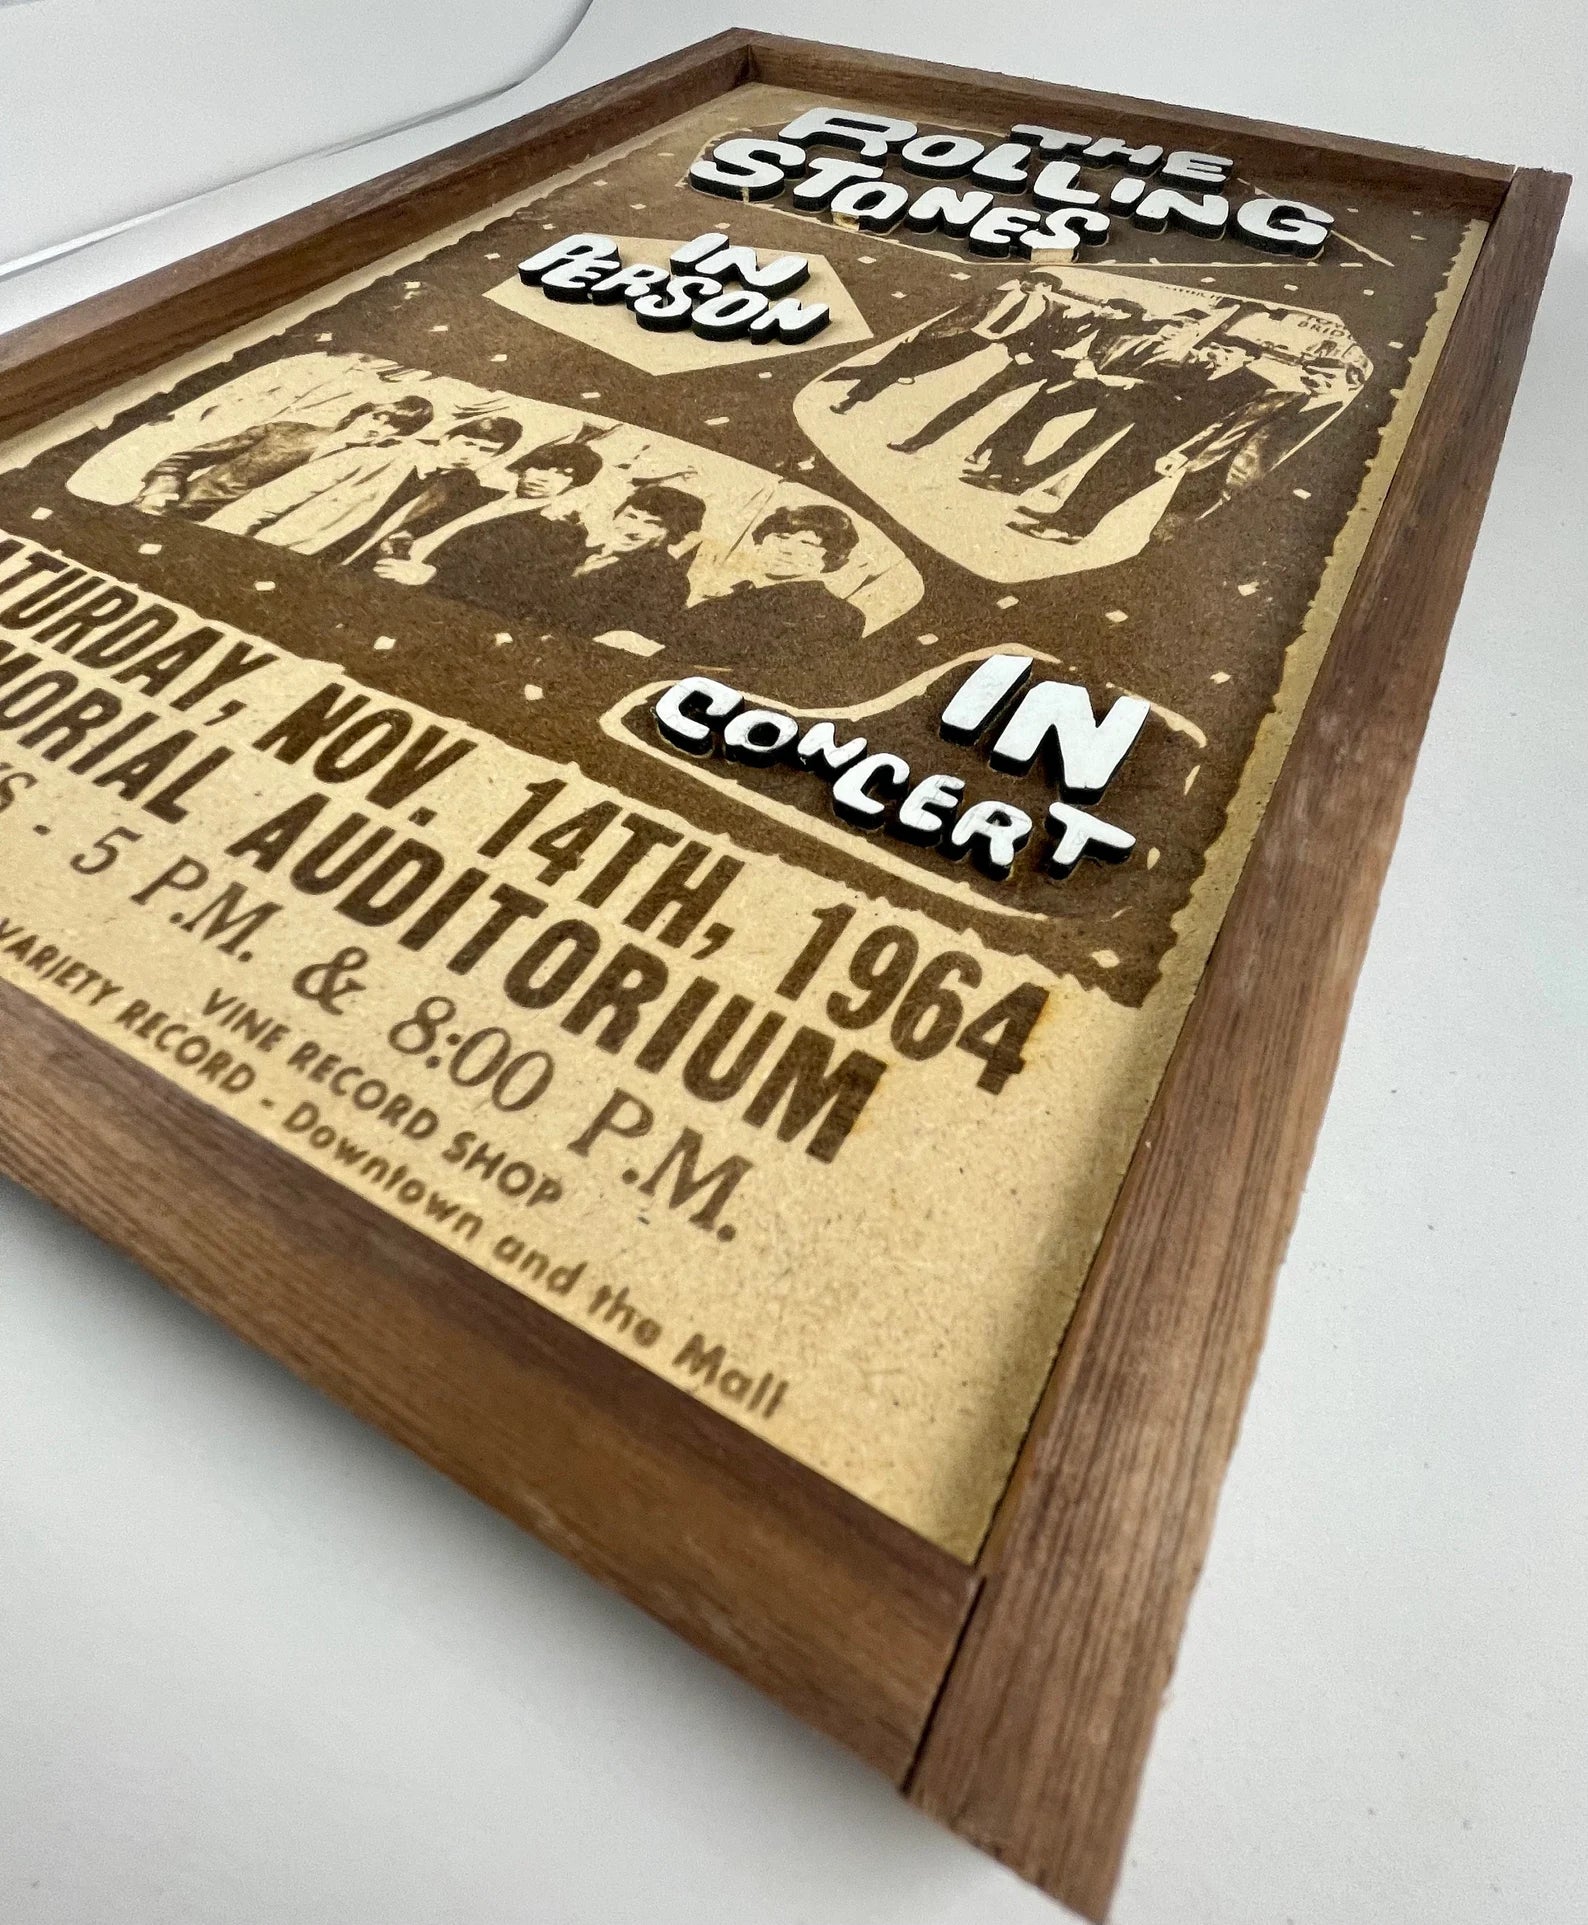 Rolling Stones 1964 - Wood Sign